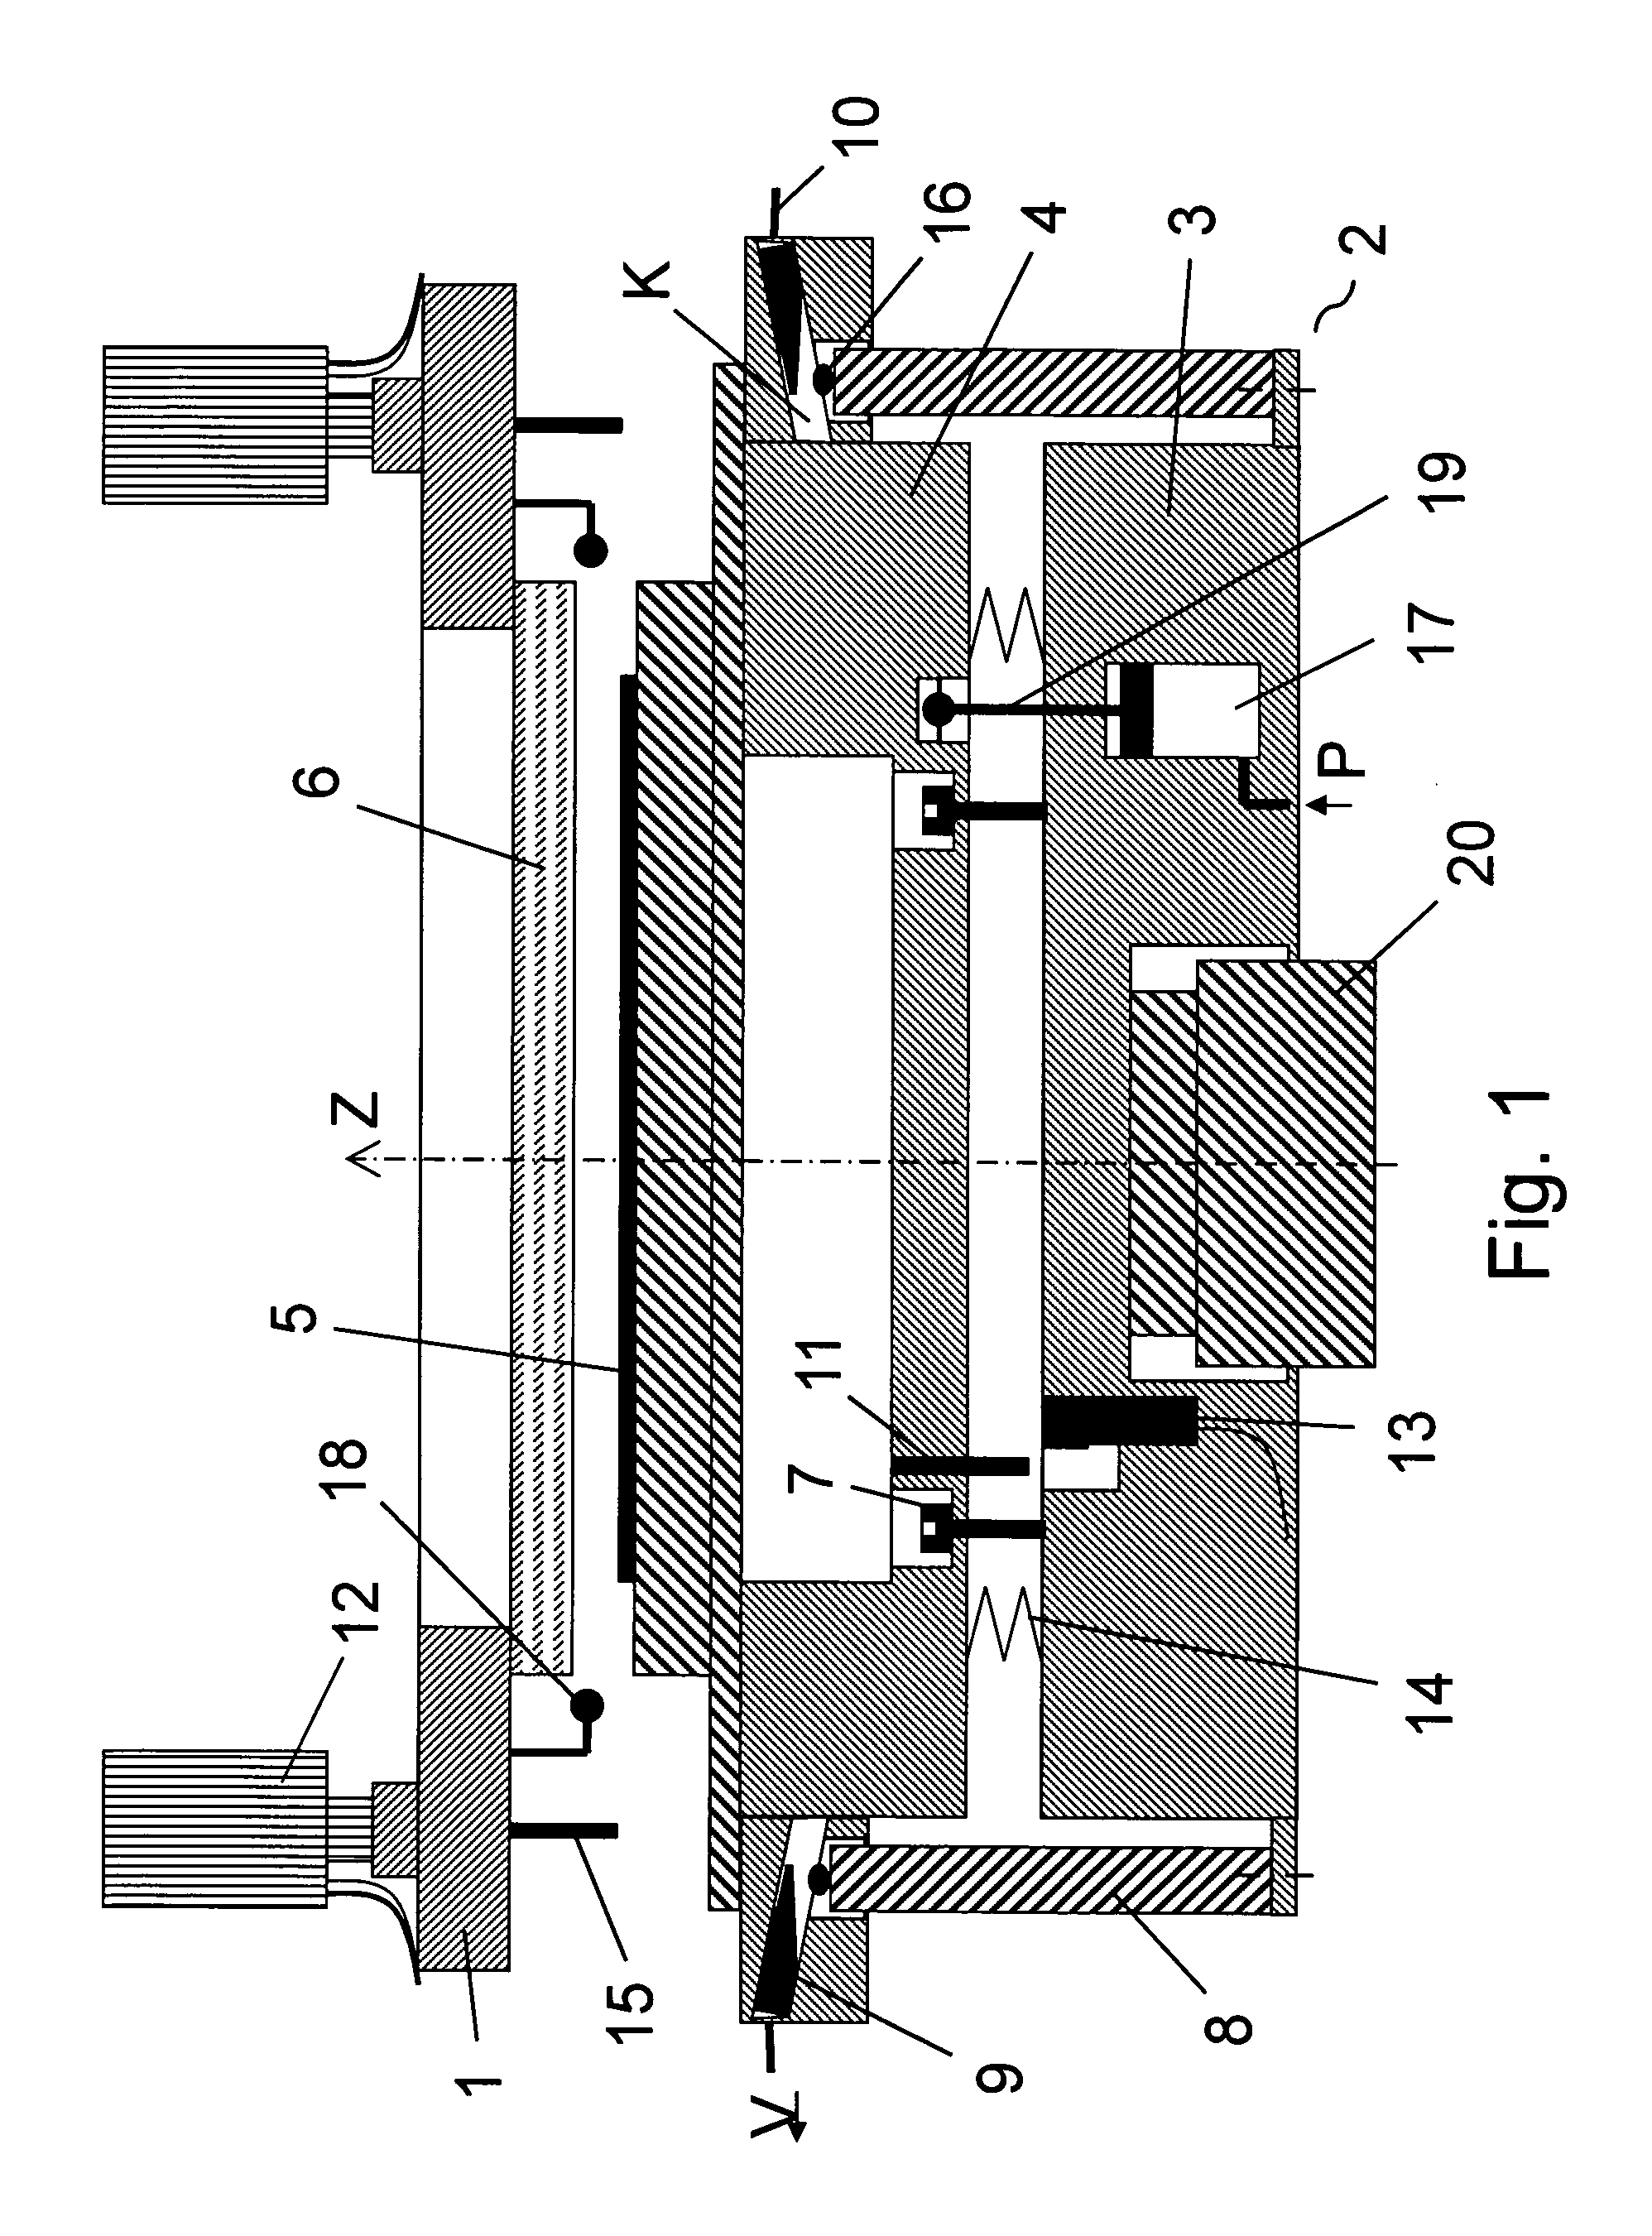 Method and device for active wedge error compensation between two objects that can be positioned substantially to parallel to each other